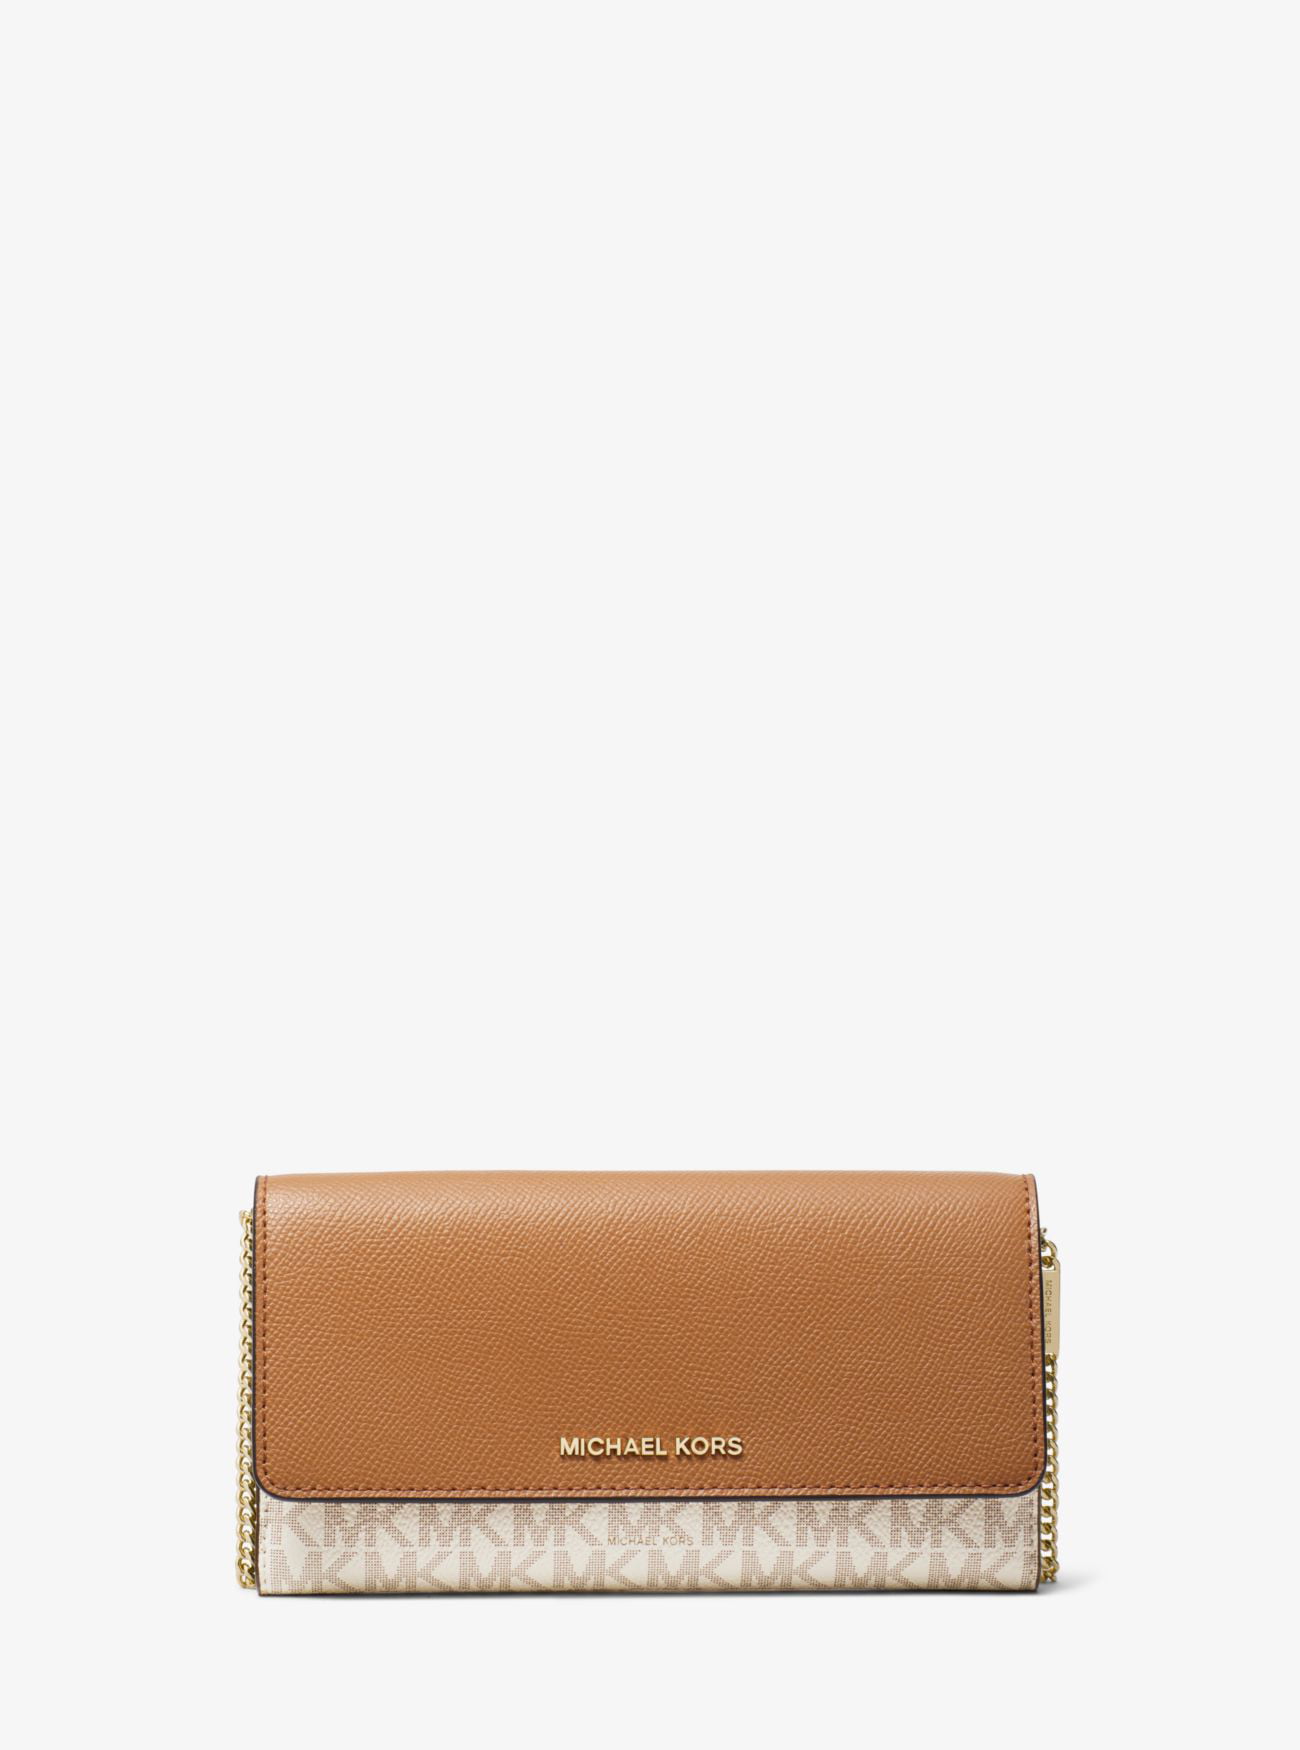 large logo and leather convertible chain wallet